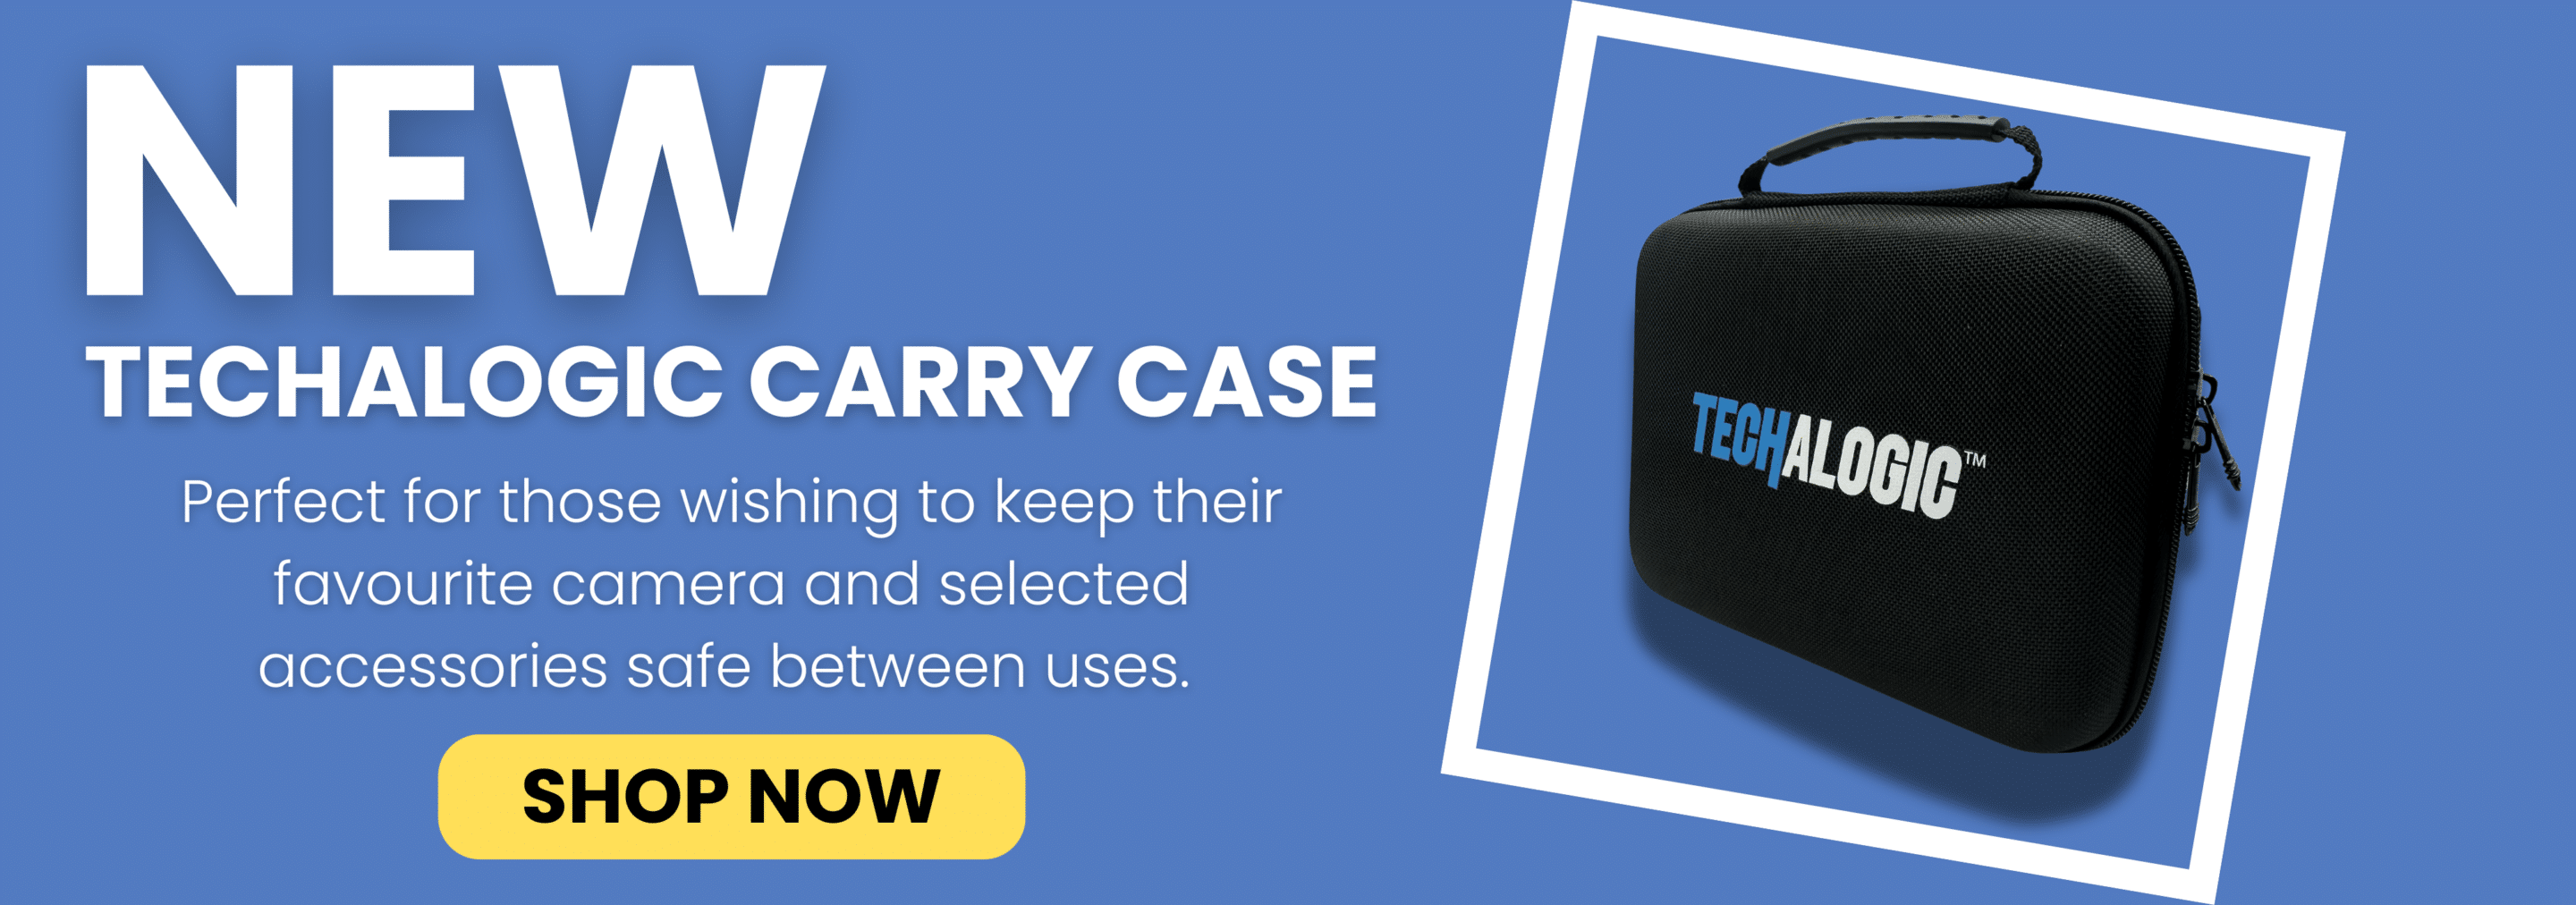 Promotional image featuring a new 'TECHALOGIC CARRY CASE' with text stating it is perfect for keeping camera and accessories safe, including a 'SHOP NOW' button on a blue background.